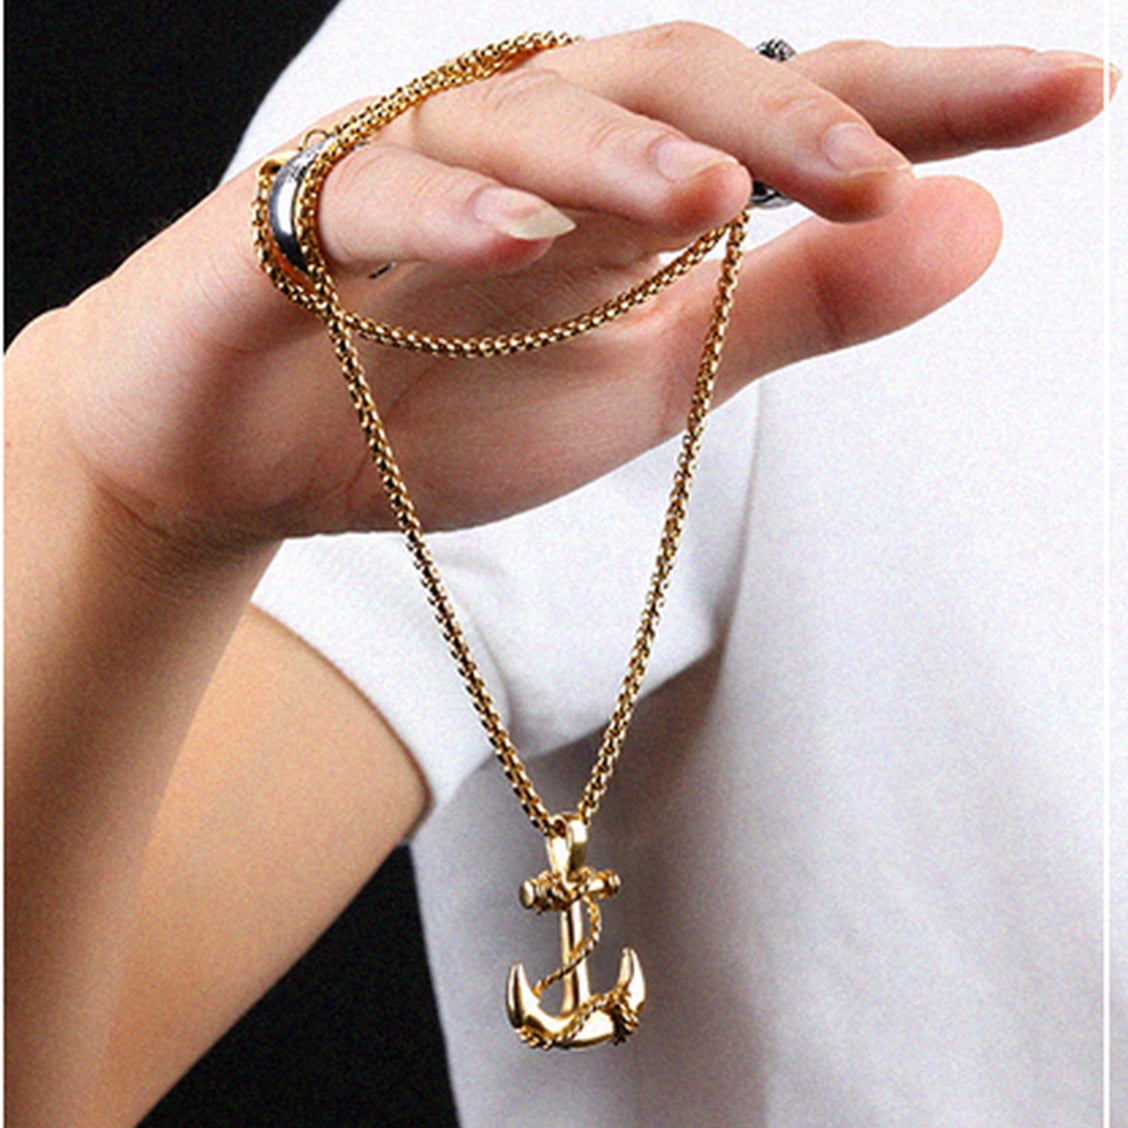 Men's Anchor Necklace 10K Yellow Gold 22